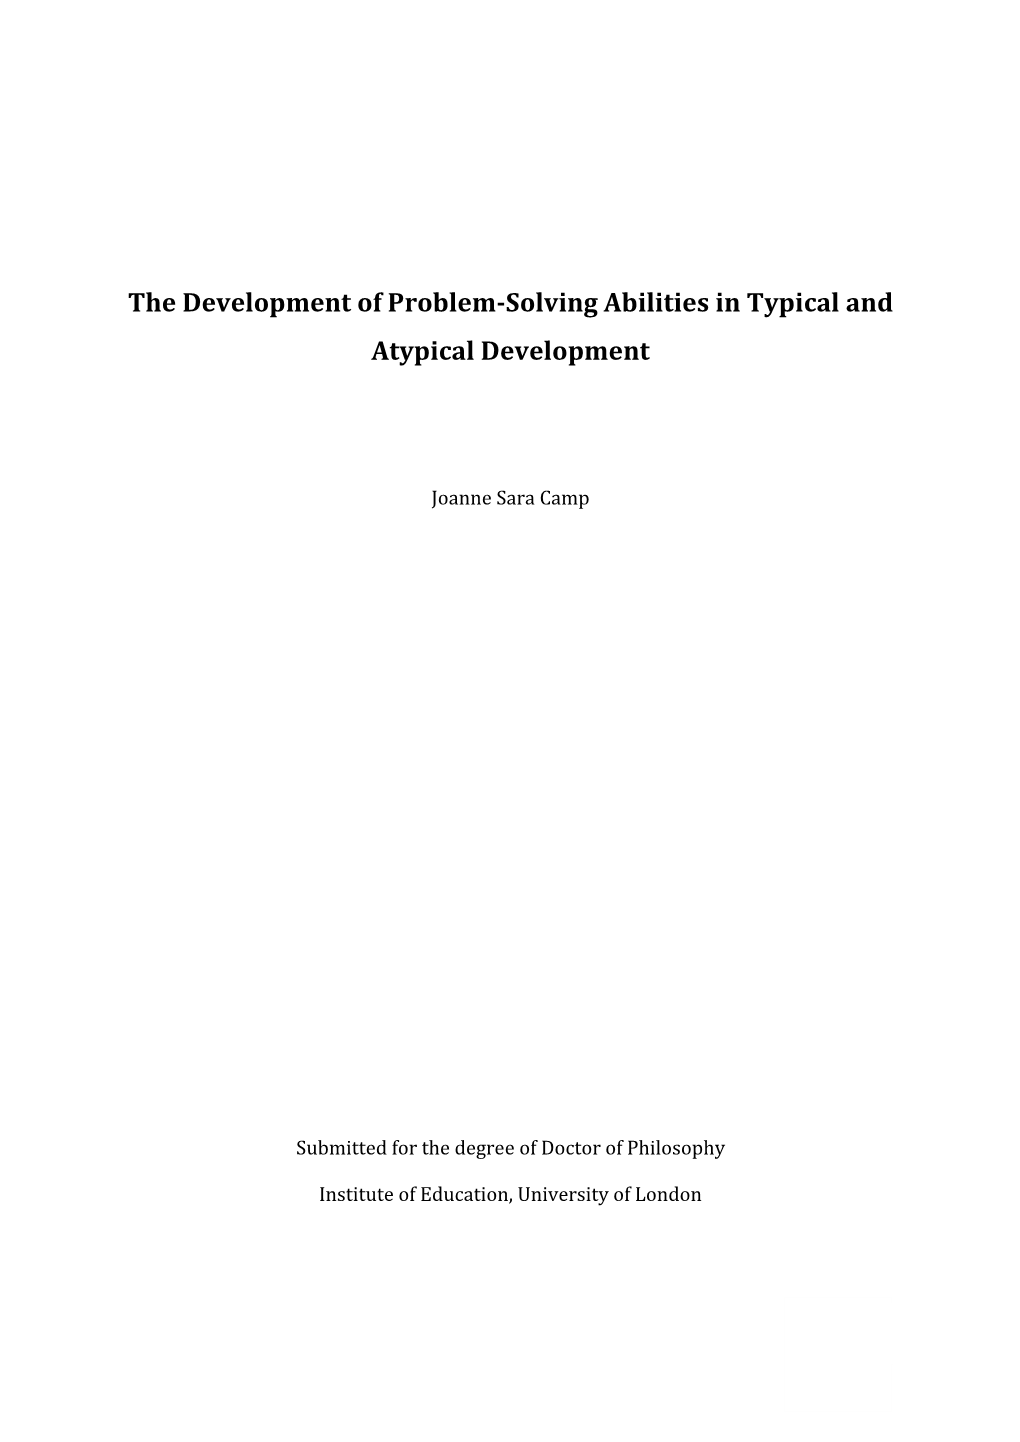 The Development of Problem-Solving Abilities in Typical and Atypical Development